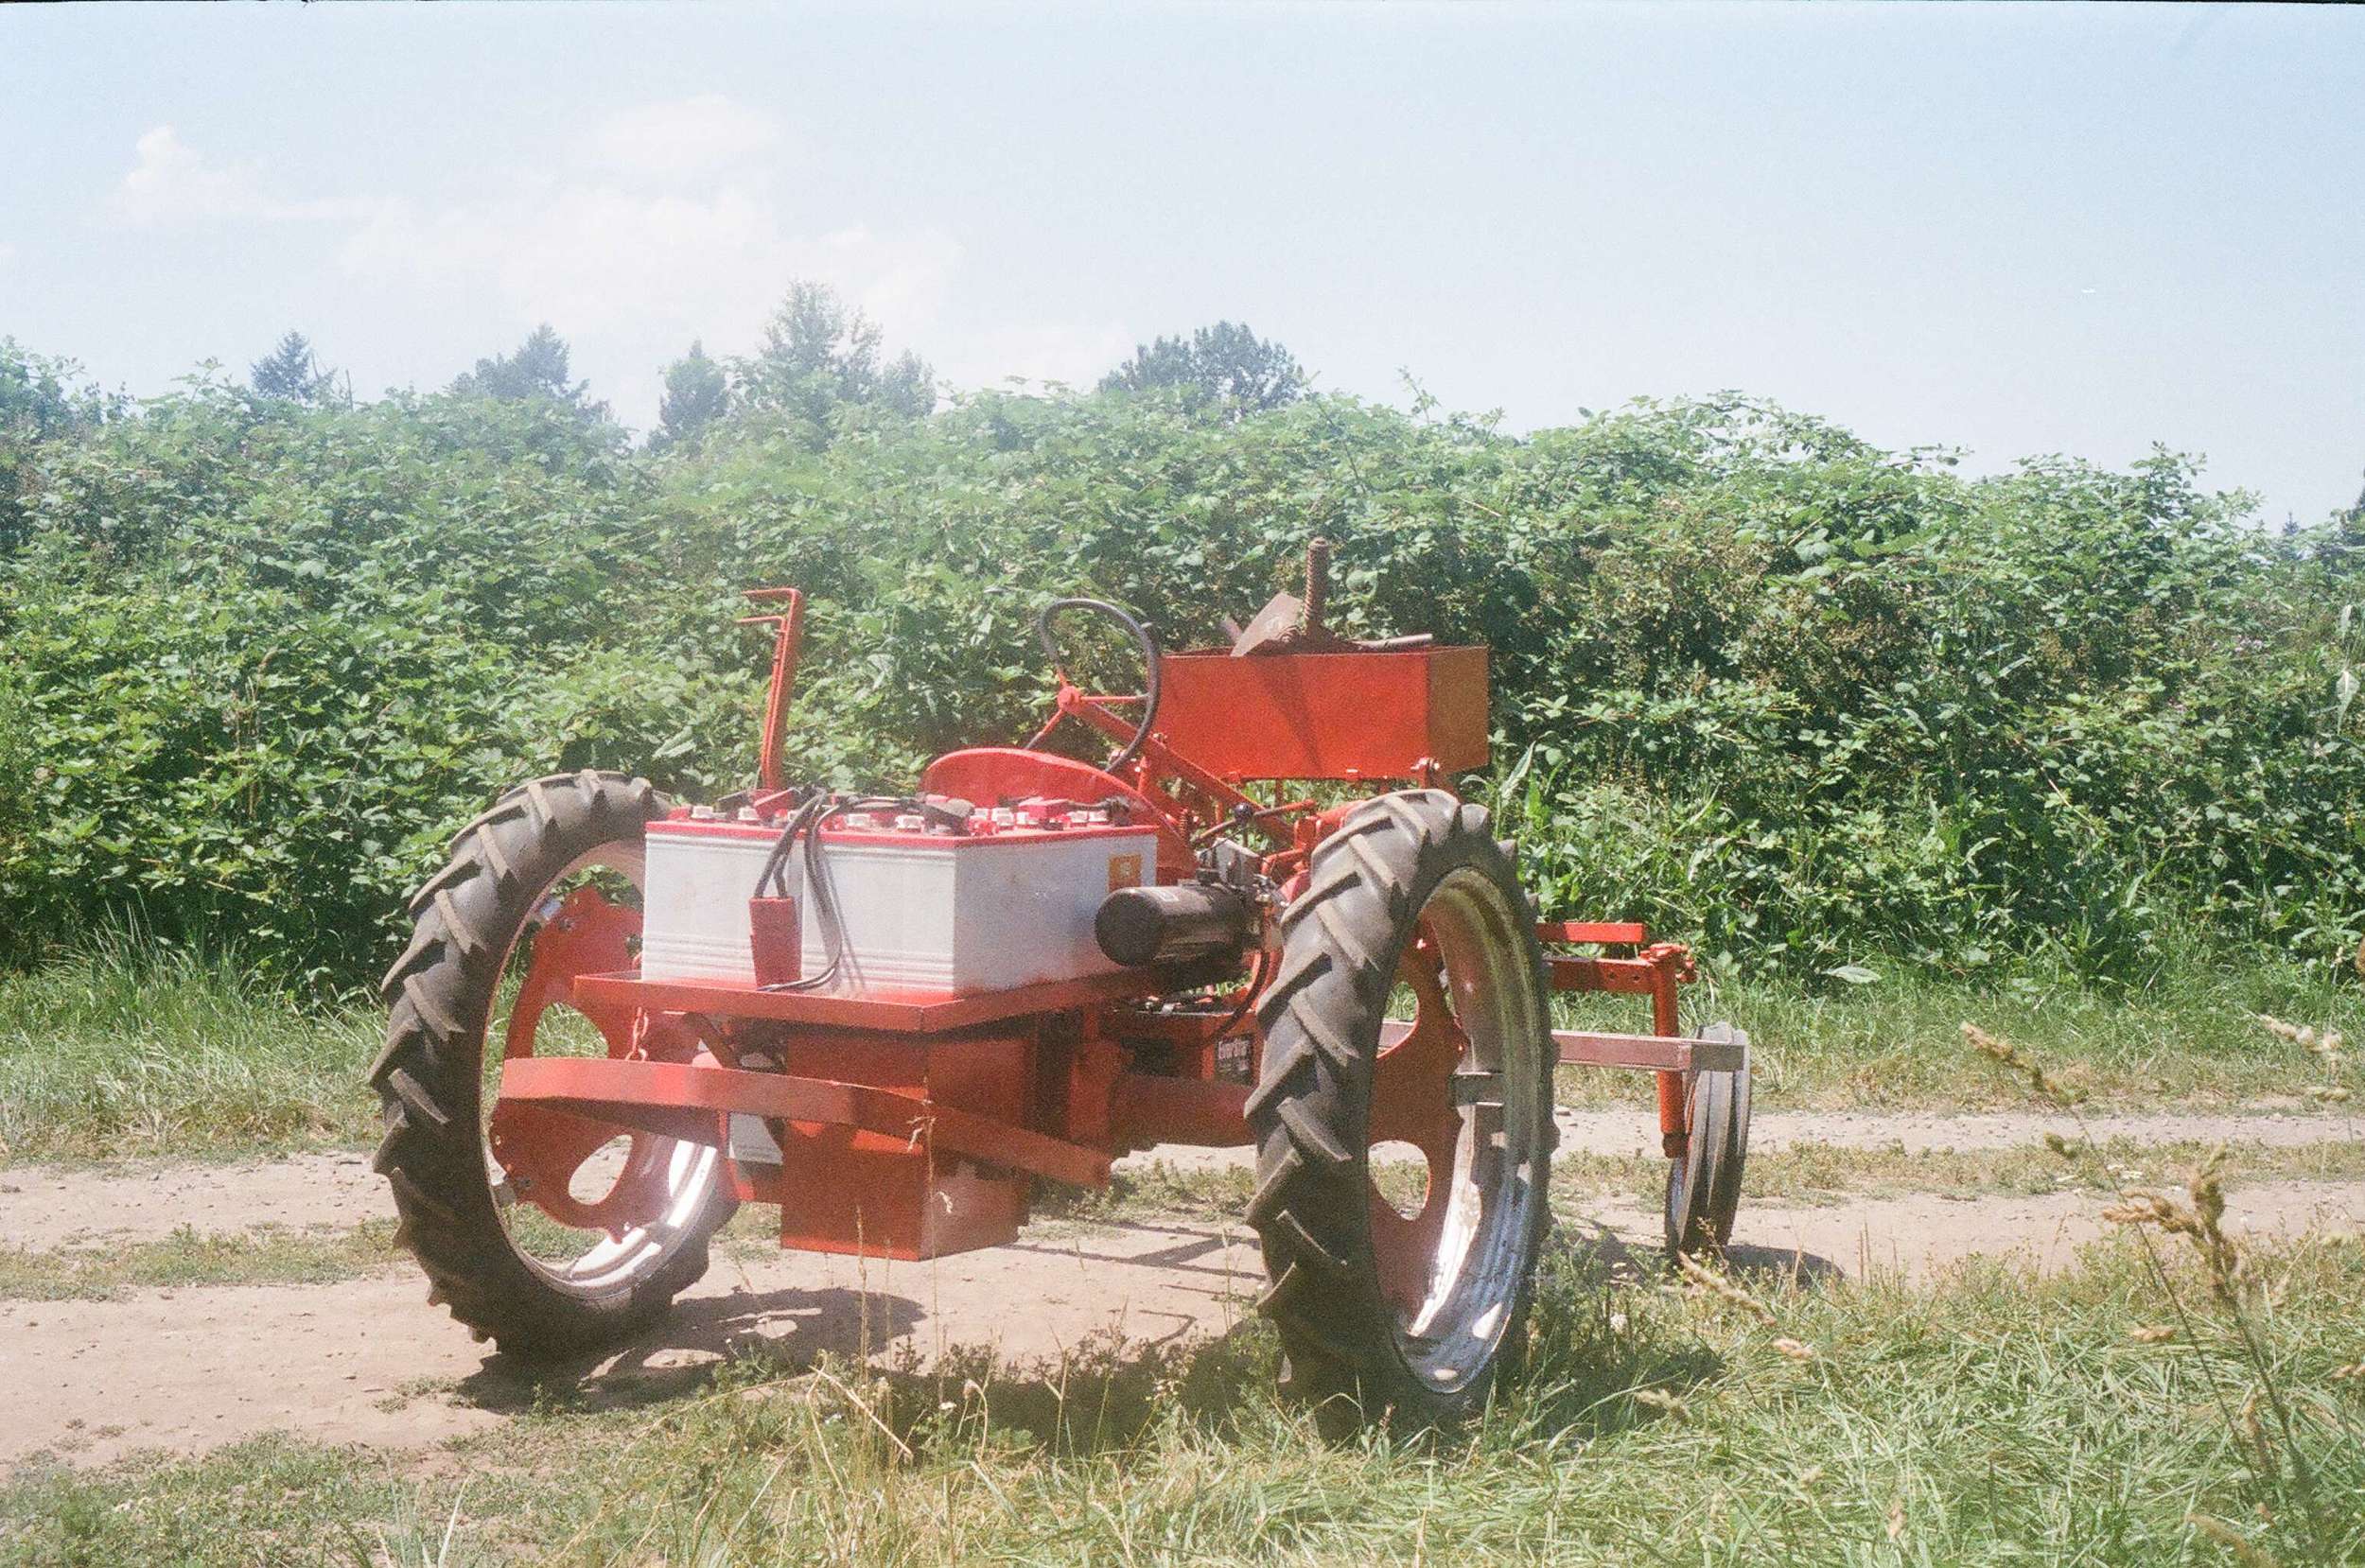  A 1950's era gas powered Allis Chalmers Model G has been converted to run off of a bank of batteries. 